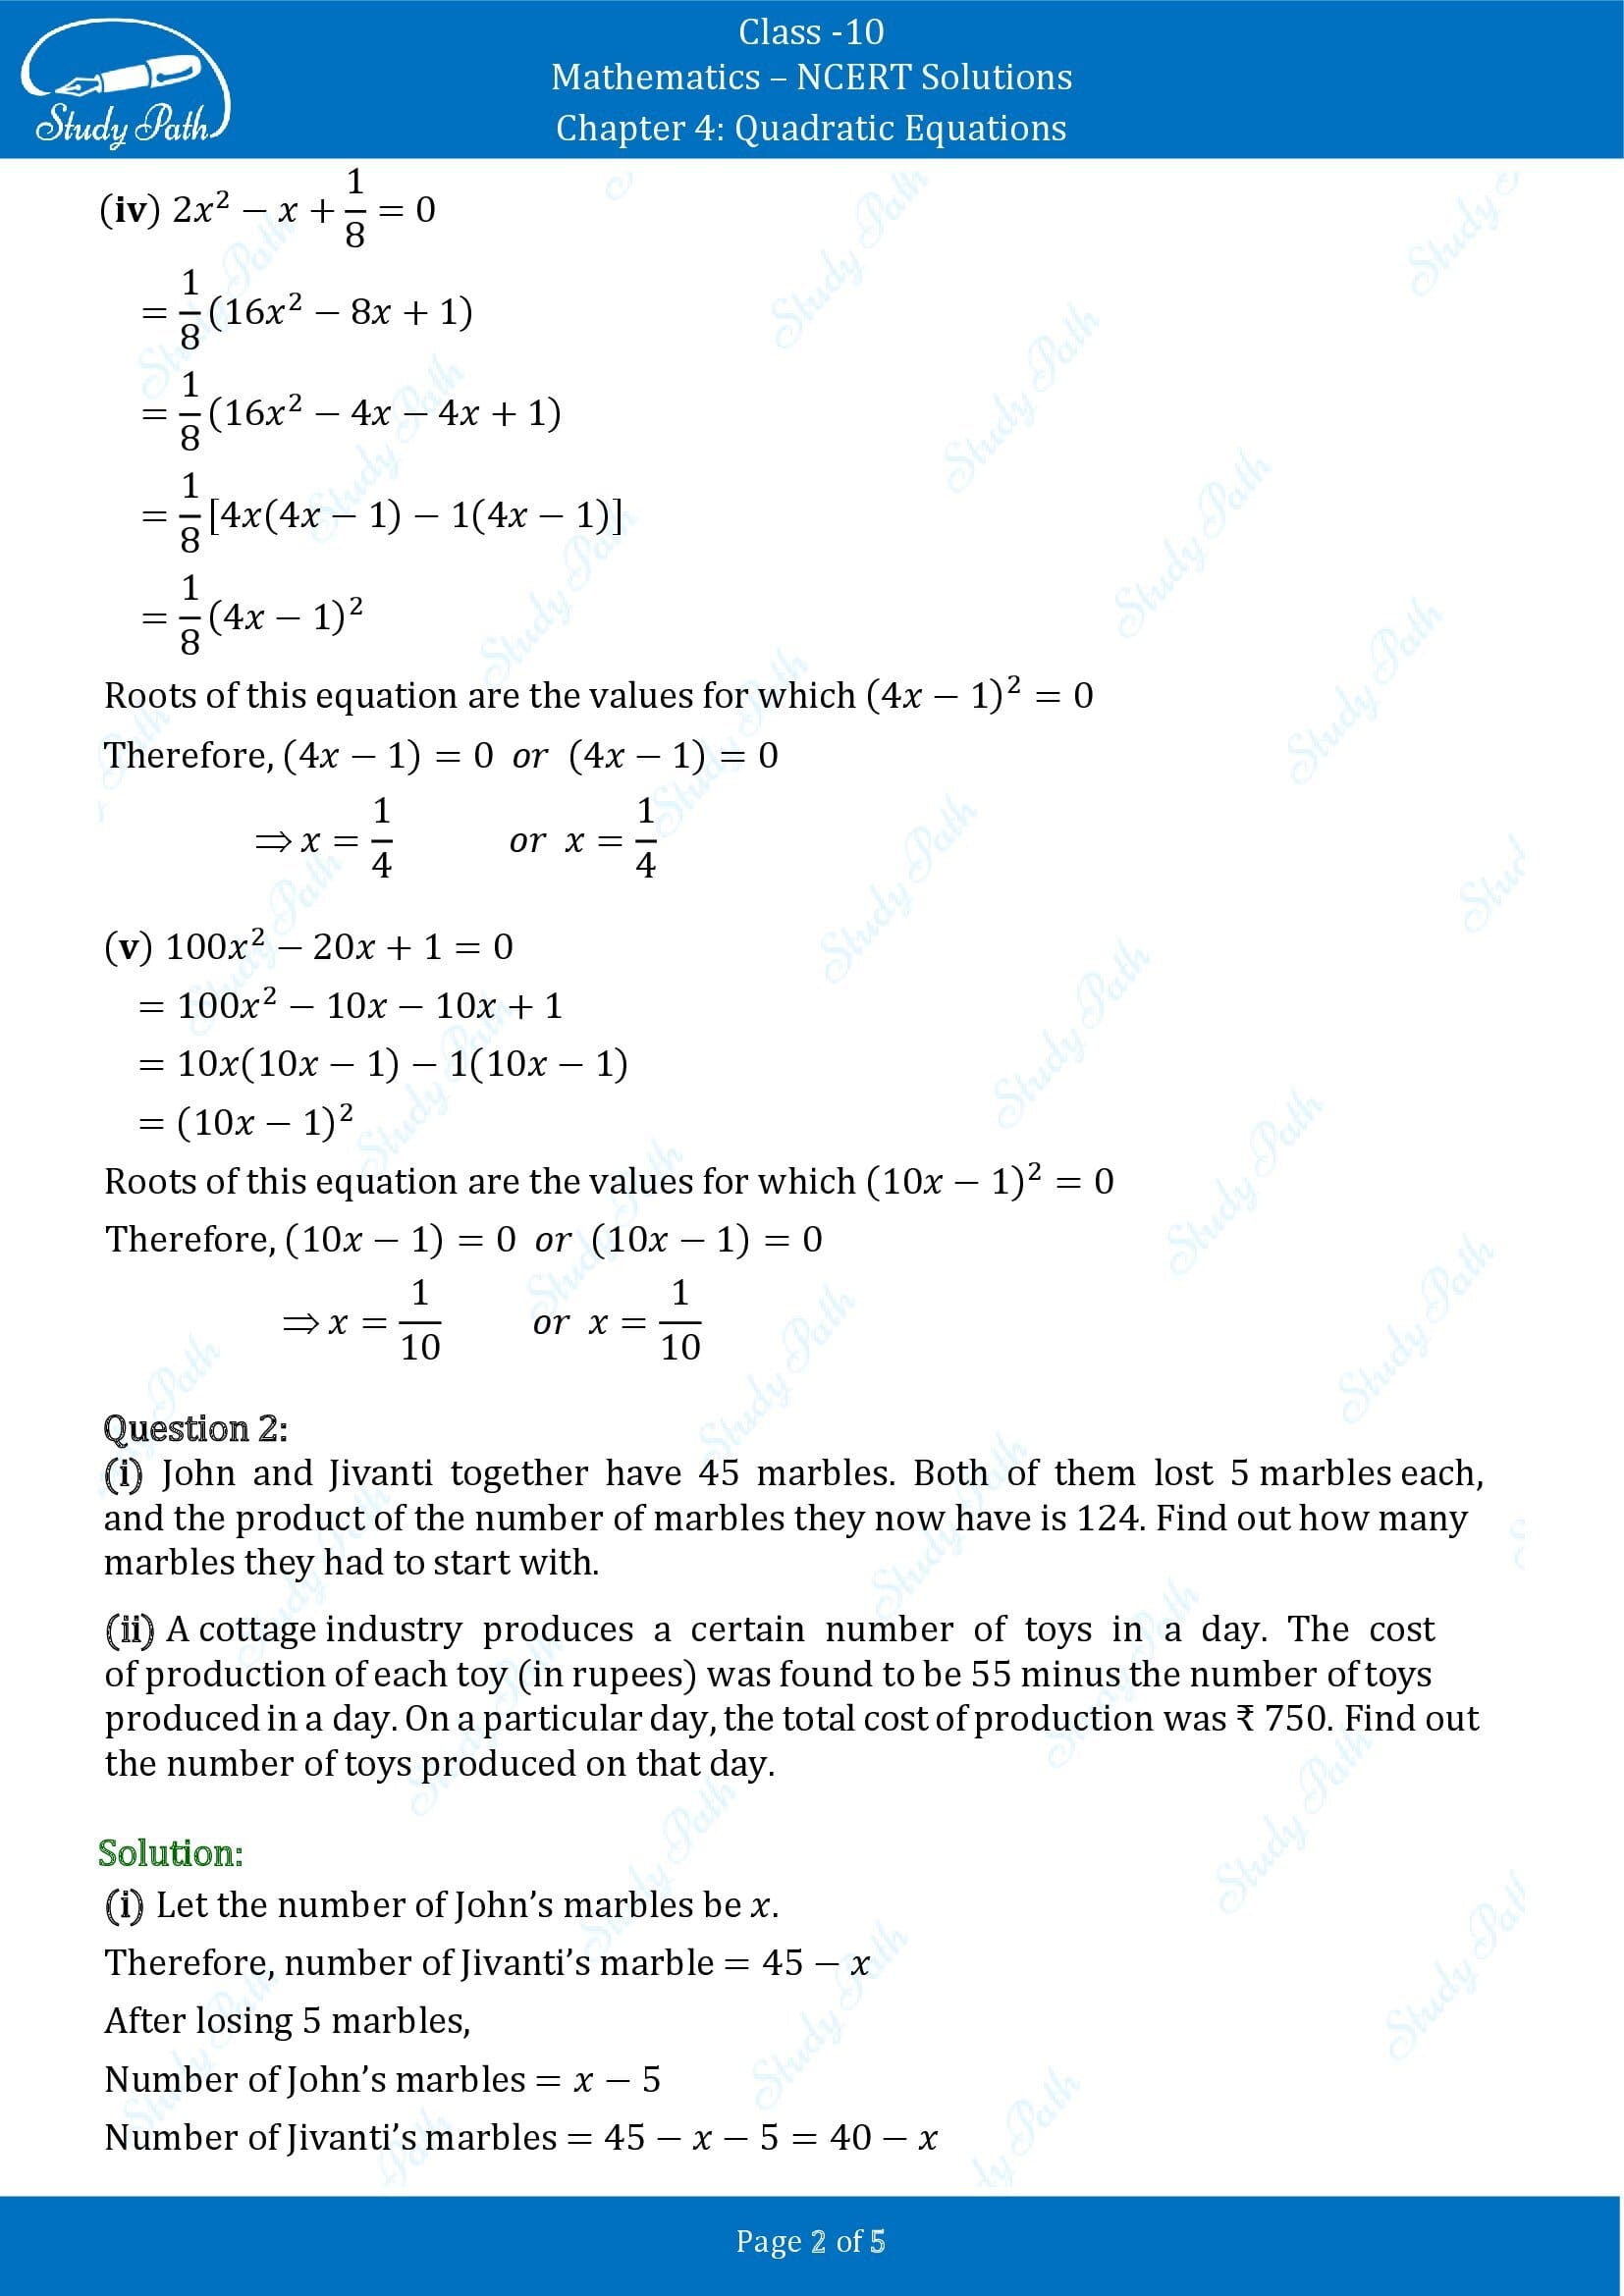 NCERT Solutions for Class 10 Maths Chapter 4 Quadratic Equations Exercise 4.2 00002